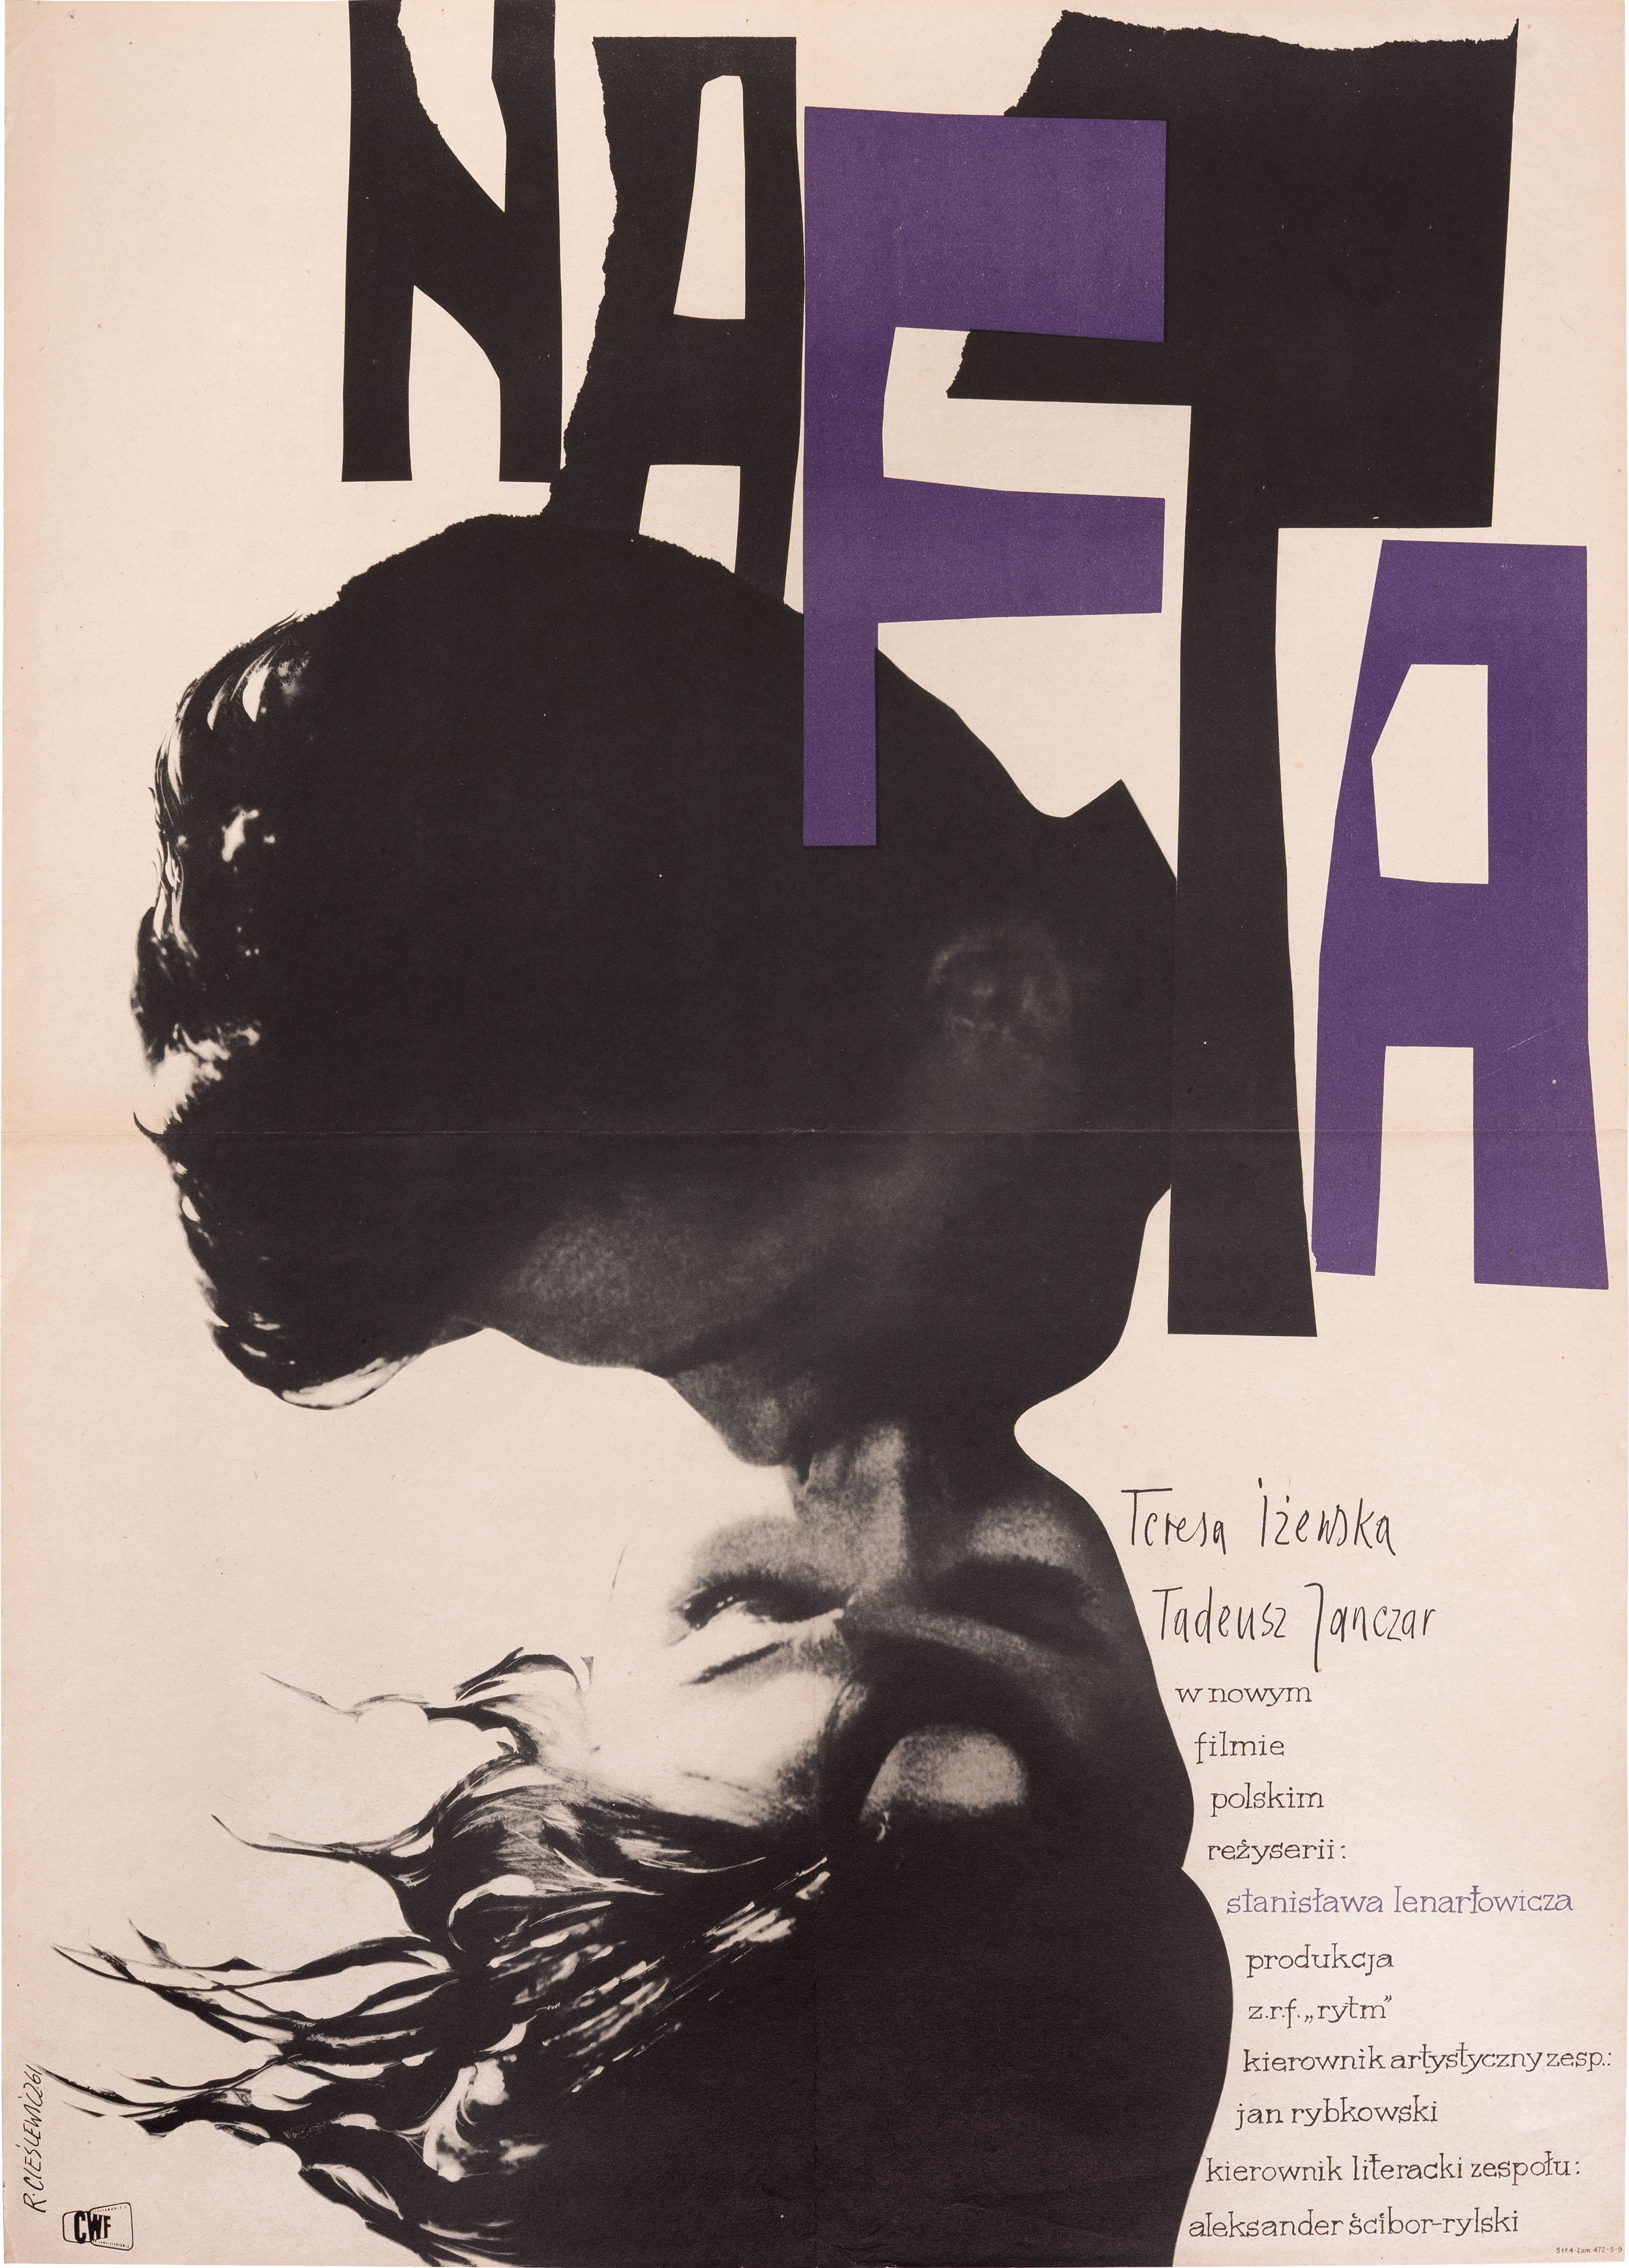 Original vintage poster for 'The Oil' movie (polish 'Nafta'), by Roman Cieslewicz, 1961.
Printed by CWF (polish film distribution office).